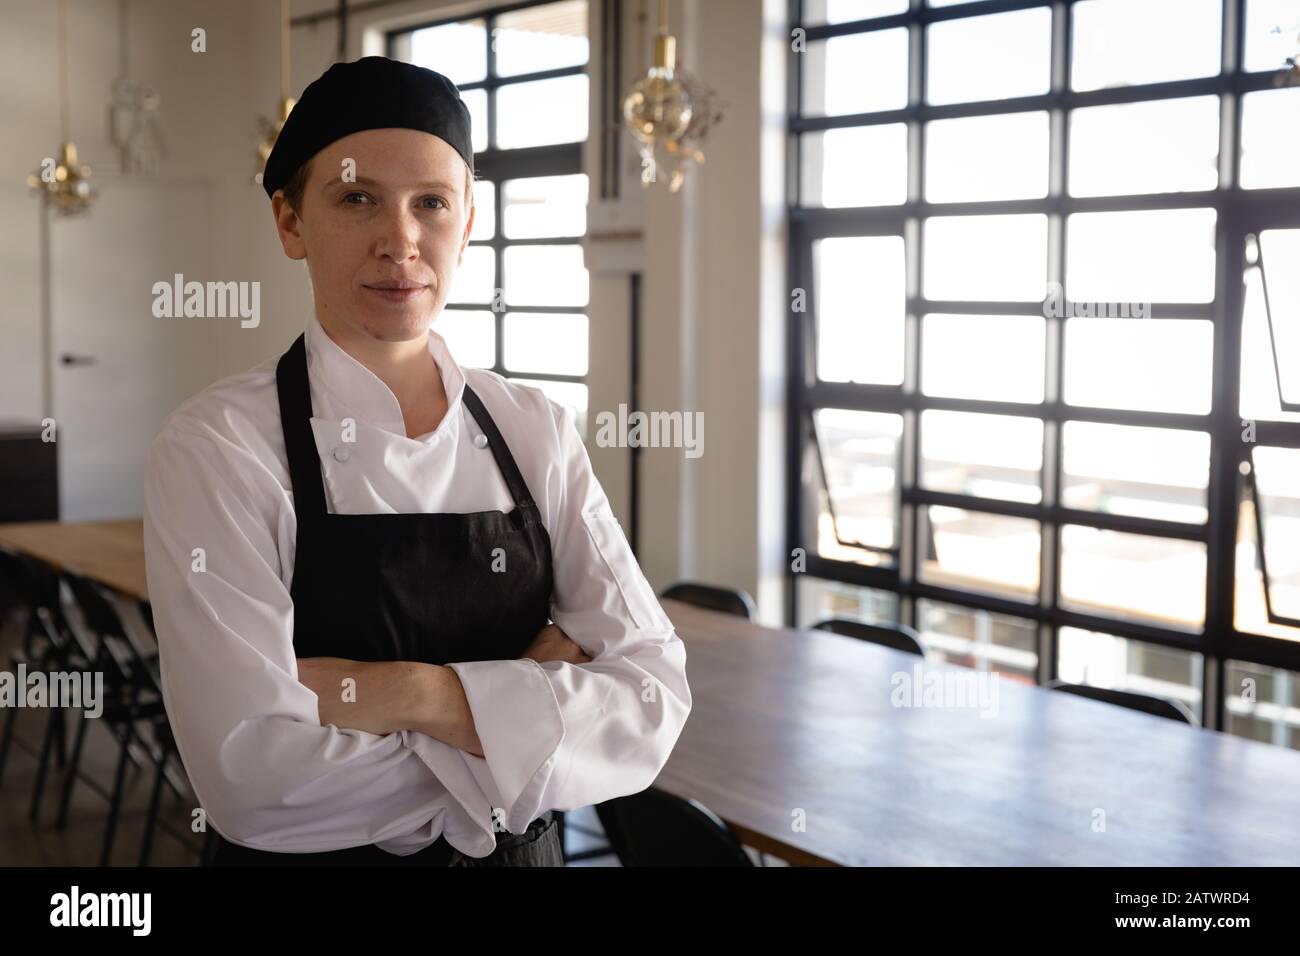 Caucasian chef looking at the camera Stock Photo